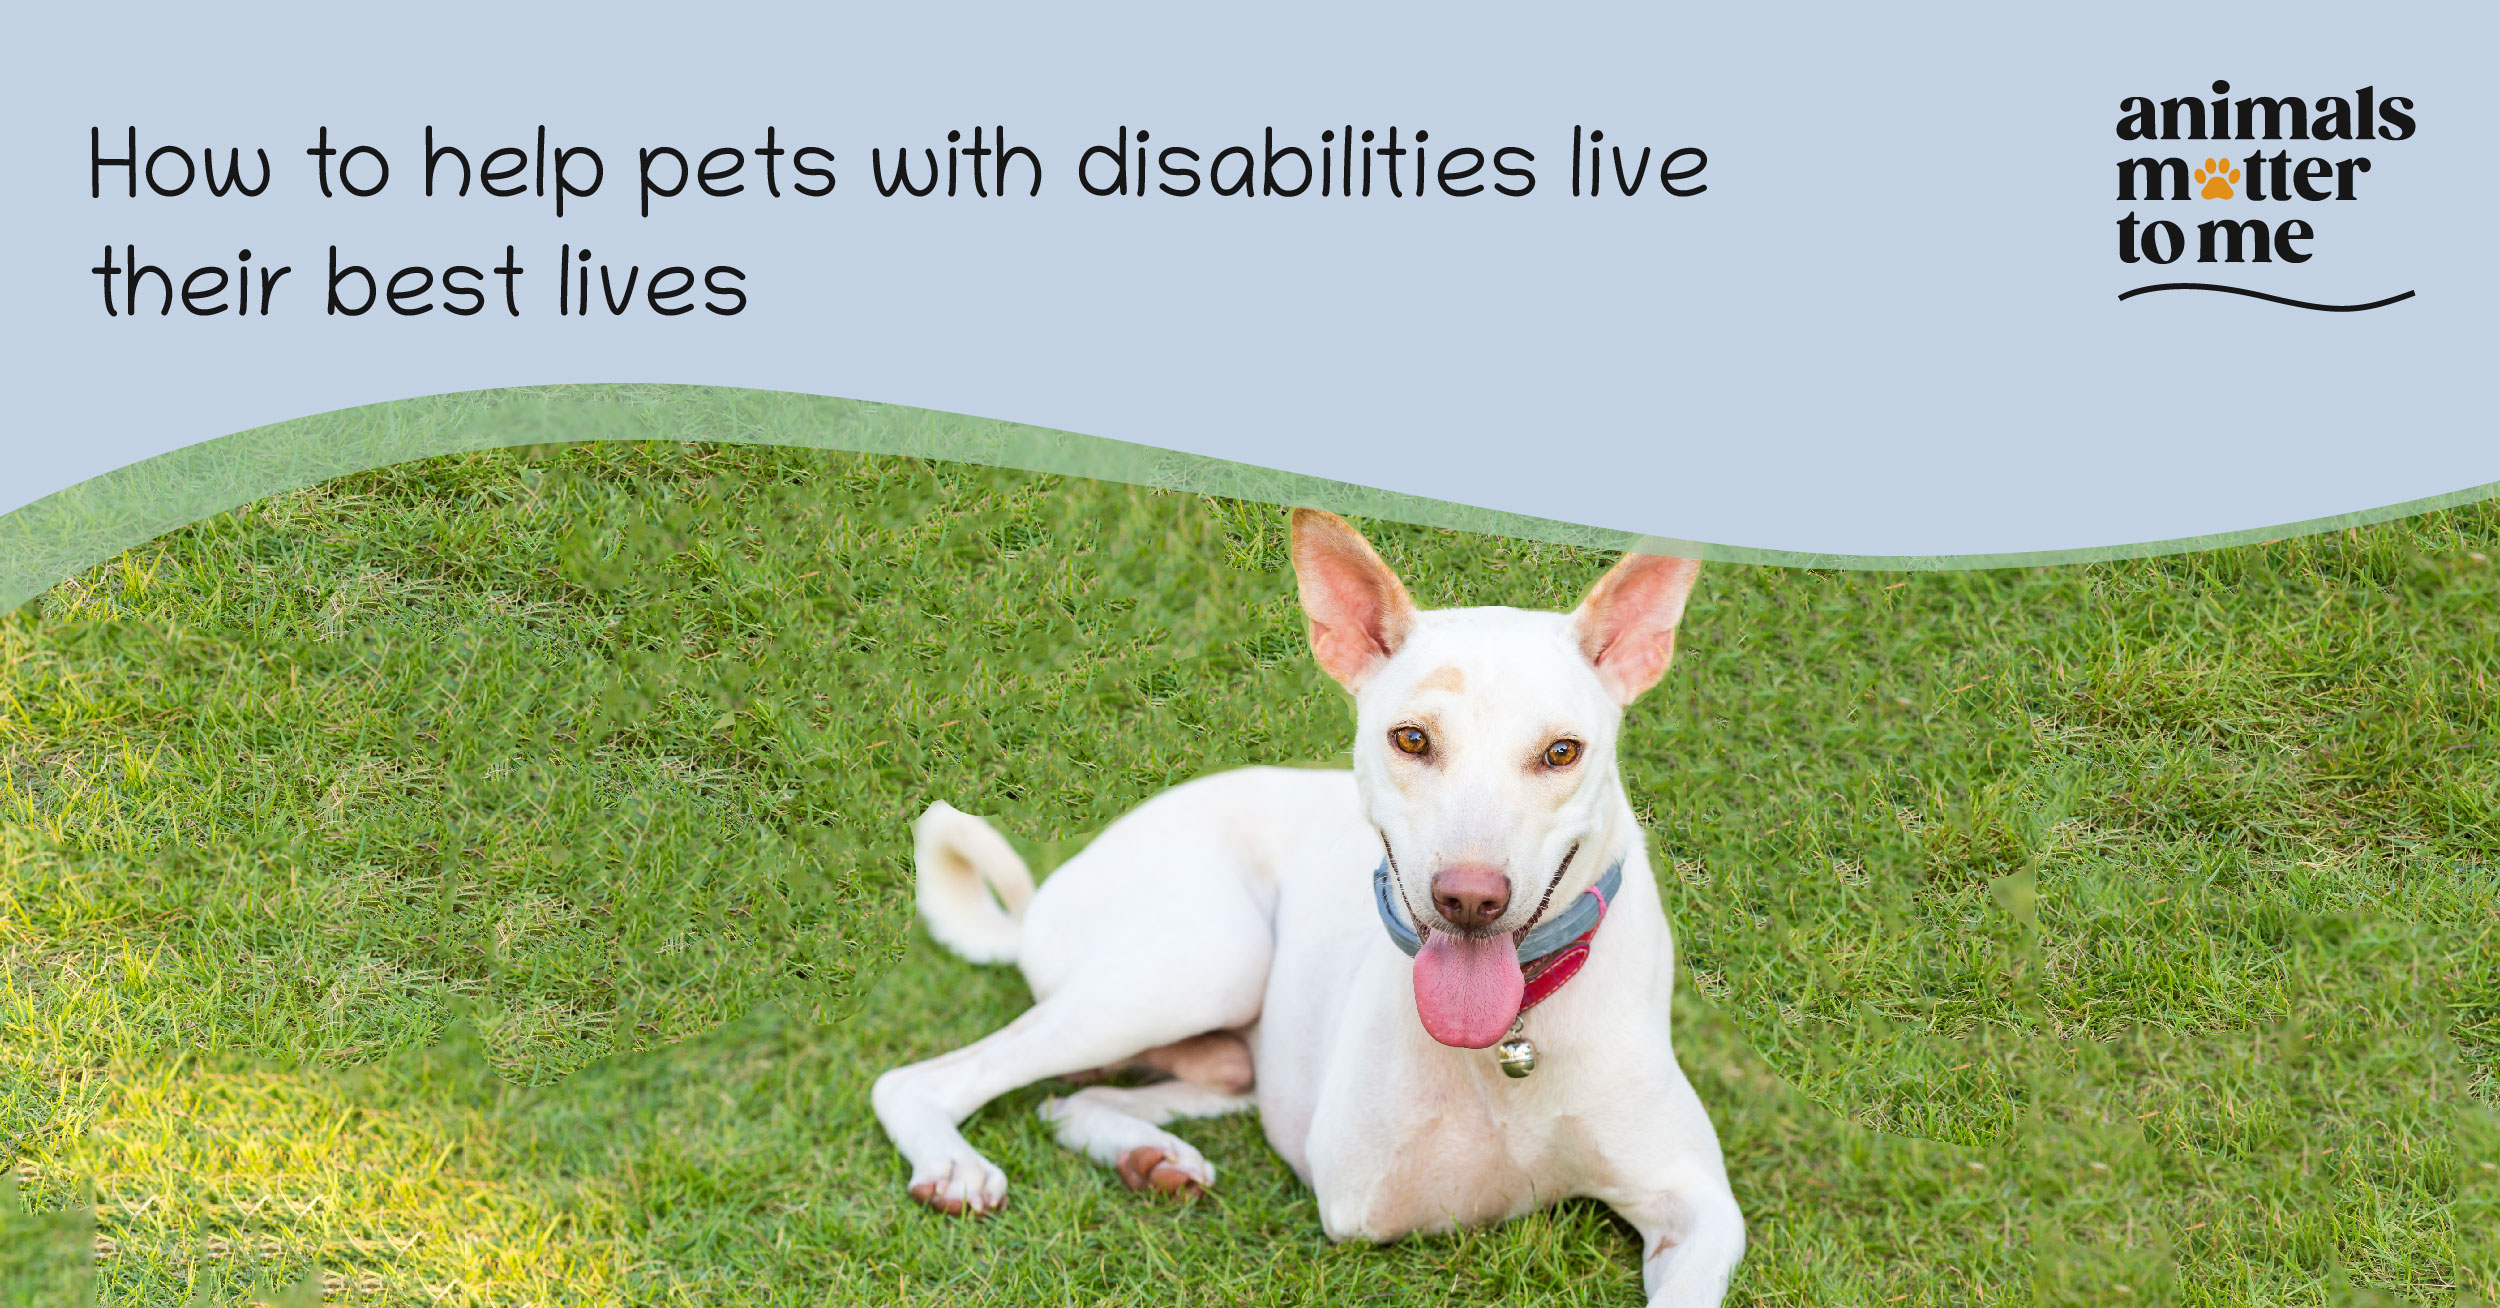 How to help pets with disabilities live their best lives - Blog Cover